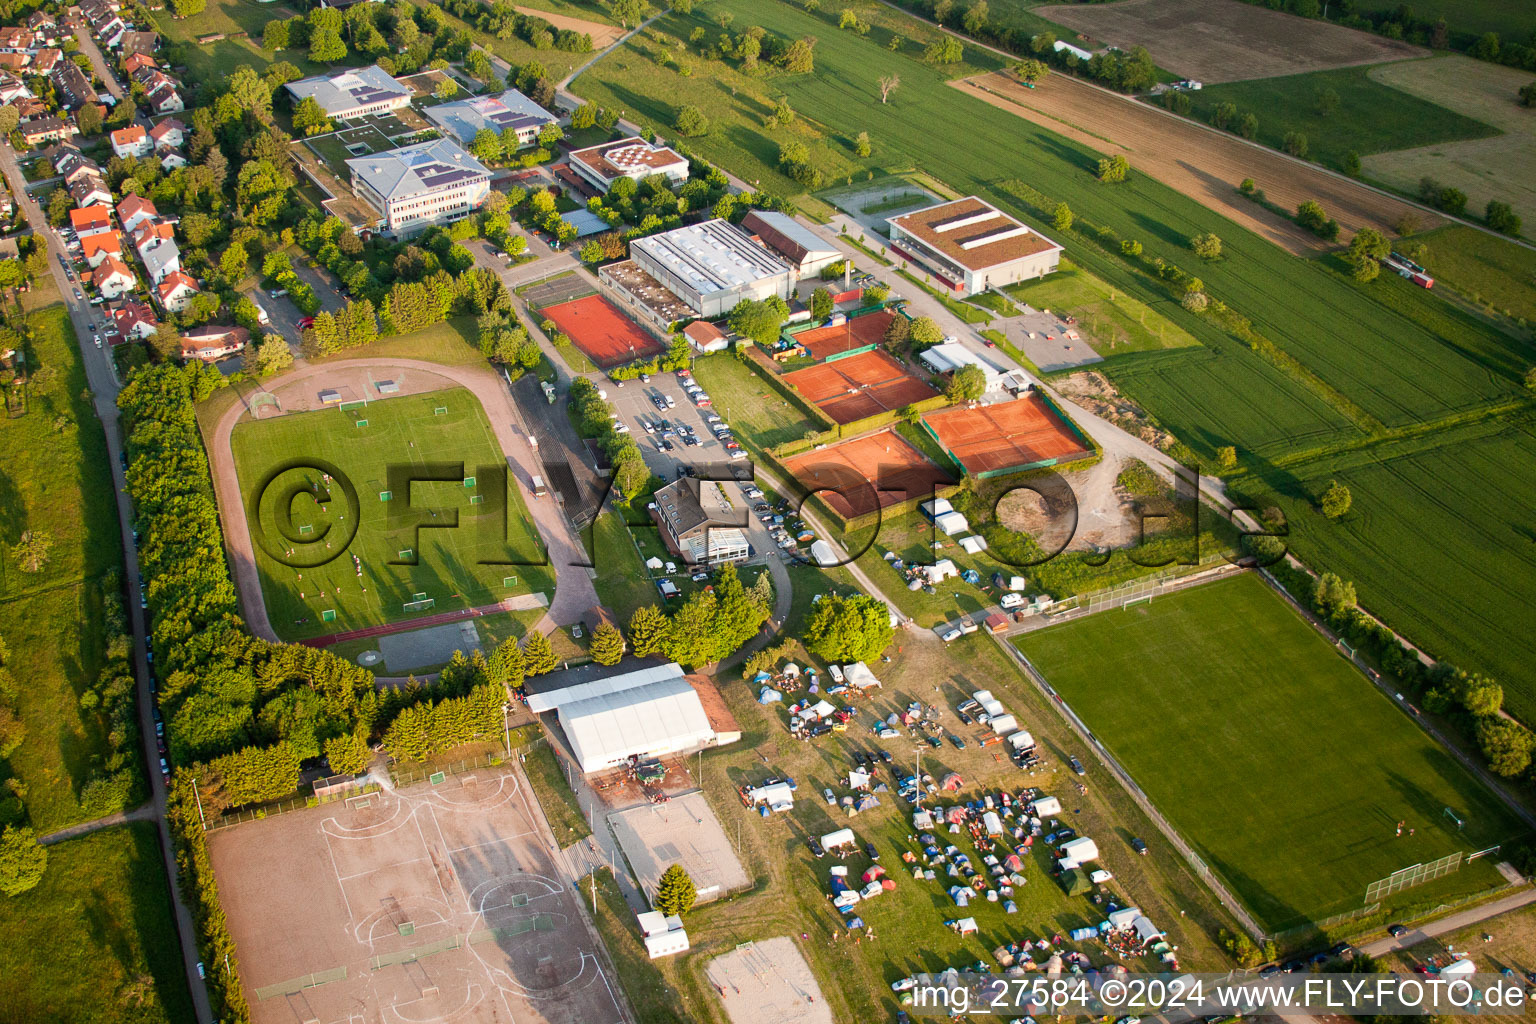 Bird's eye view of Handball Whitsun tournament in the district Langensteinbach in Karlsbad in the state Baden-Wuerttemberg, Germany